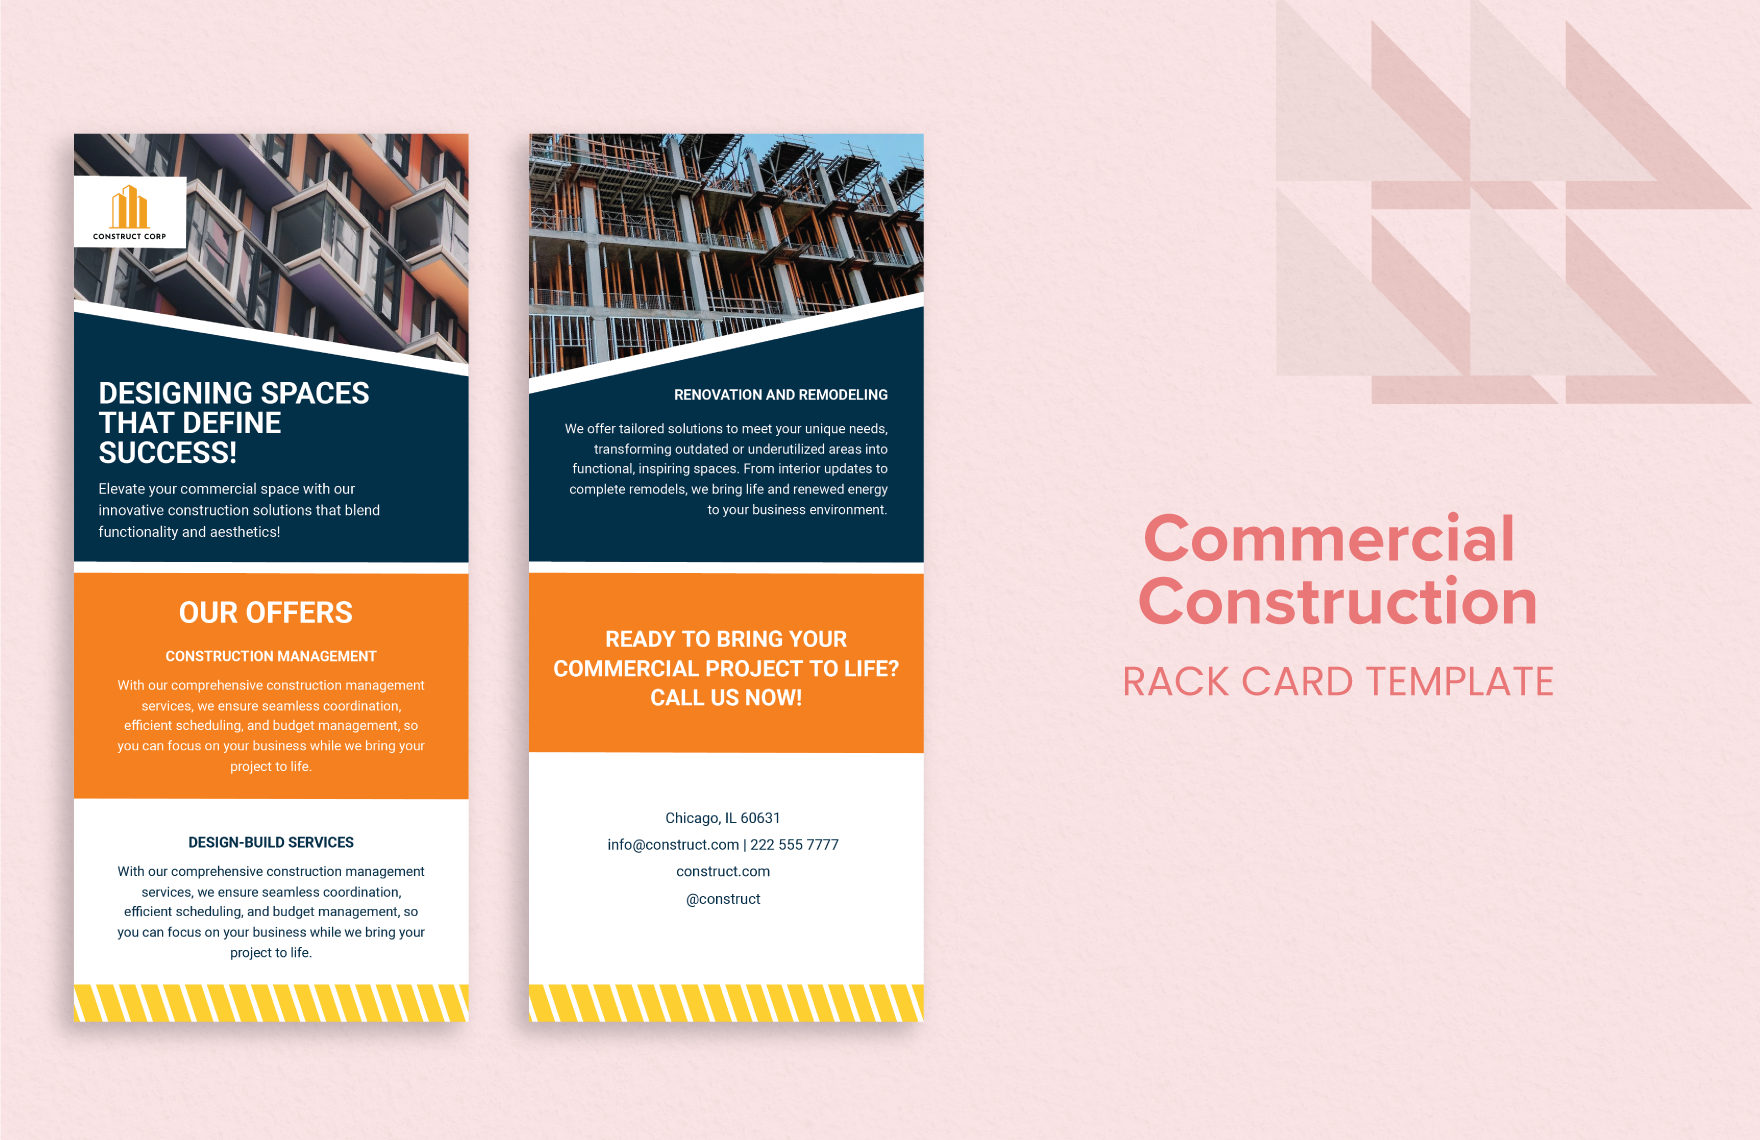 Commercial Construction Rack Card Template